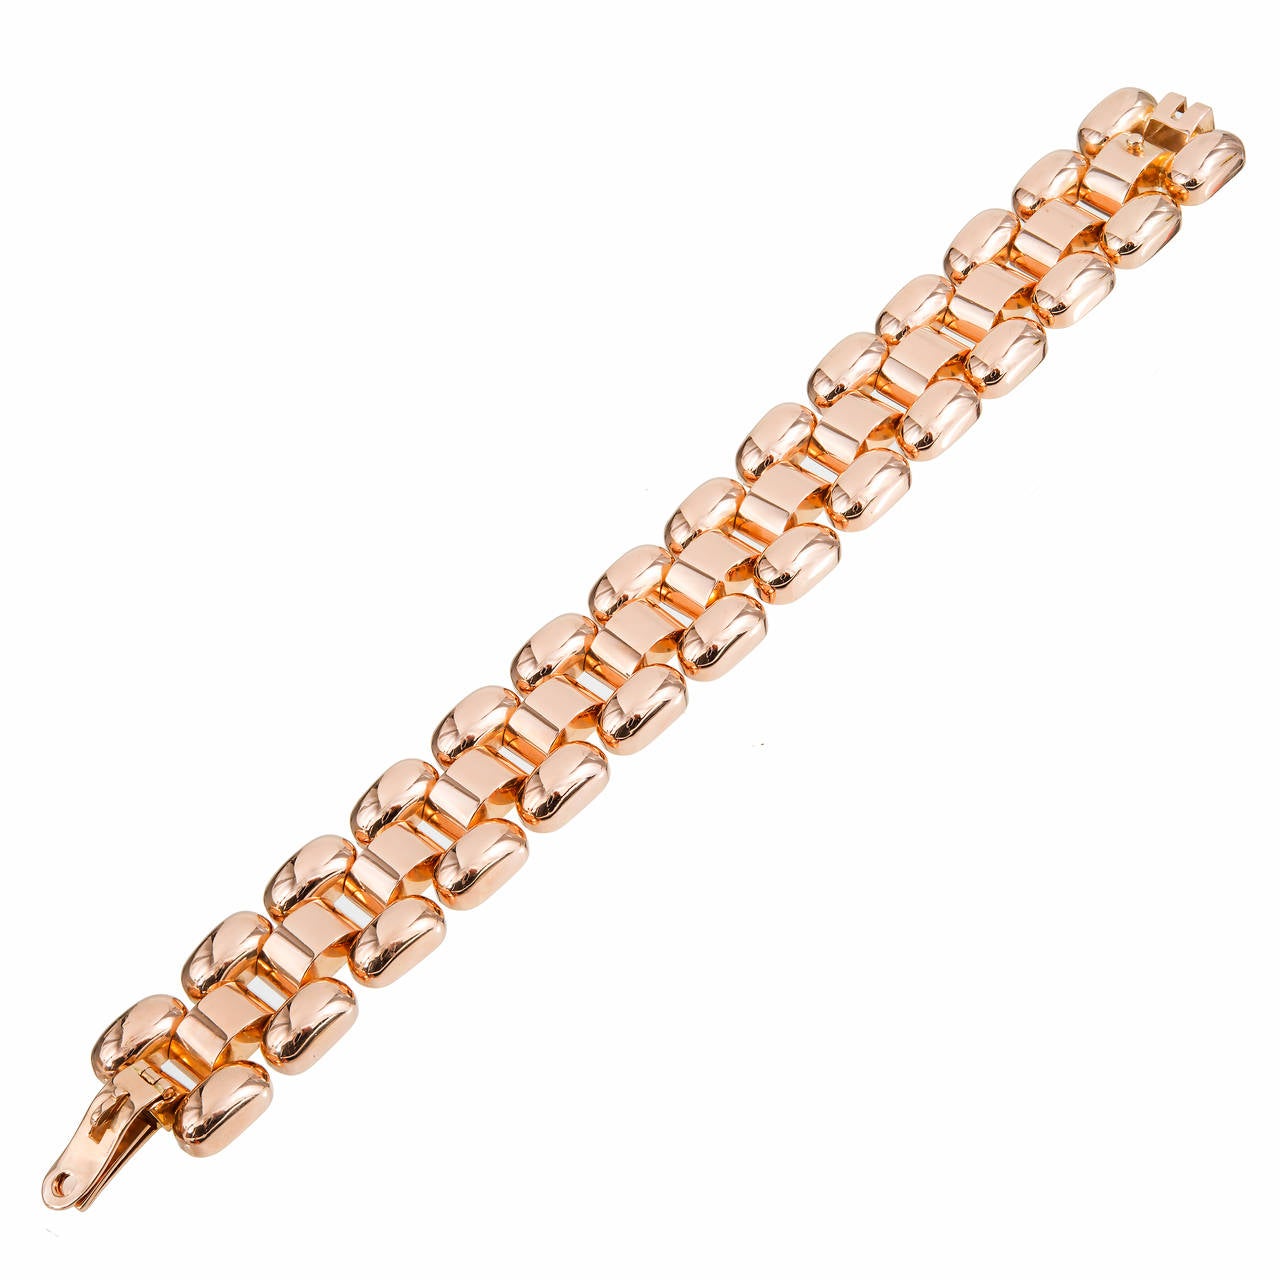 Heavy 18k pink gold Retro bracelet. Hidden built in catch. Top side fold over safety. Hallmark we do not recognize. On a Rose gold scale of 1 to 10 with 10 as the deepest pink this scores an 8.5.

18k pink gold
83.4 grams
Tested: 18k
Stamped: